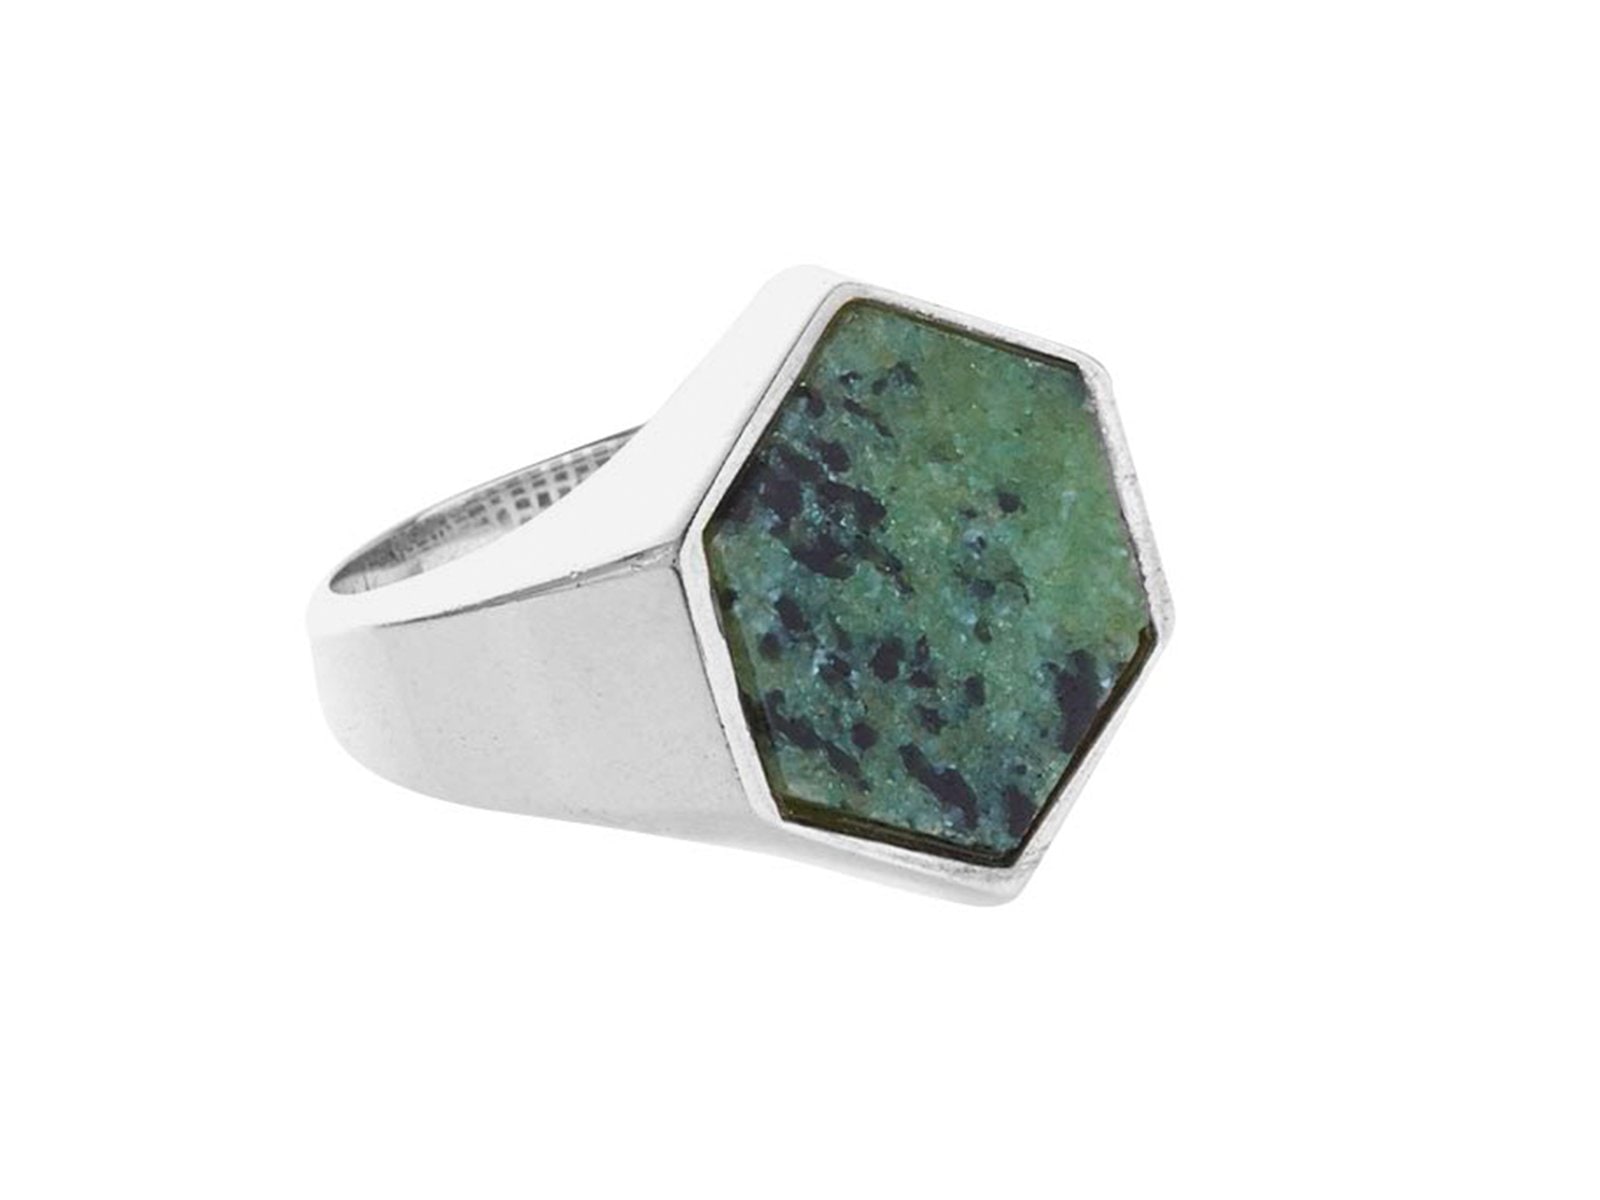 Stolen Girlfriends Club Serpent Society ring with a geometric silver shape and jade stone